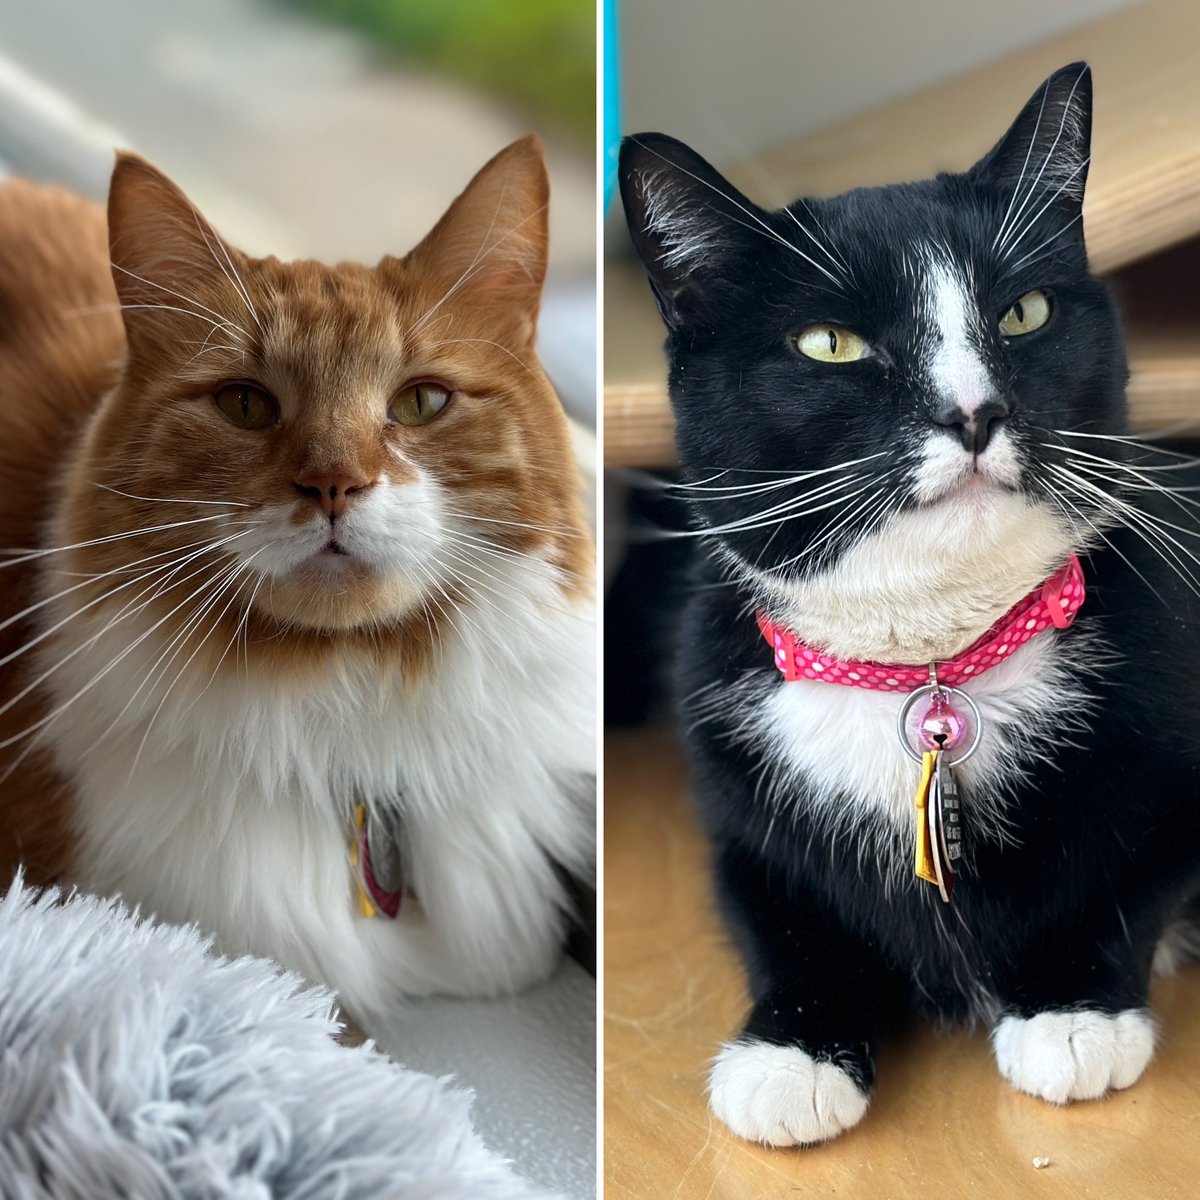 Three-year-olds Pasha (#H210291) and Peynir (#H210291) were placed into our care after they suddenly lost their home. This bashful bonded pair have a whole new world to explore together, and our team is here to support them. #GetYourRescueOn #Adopt #BiancasFurryFriends